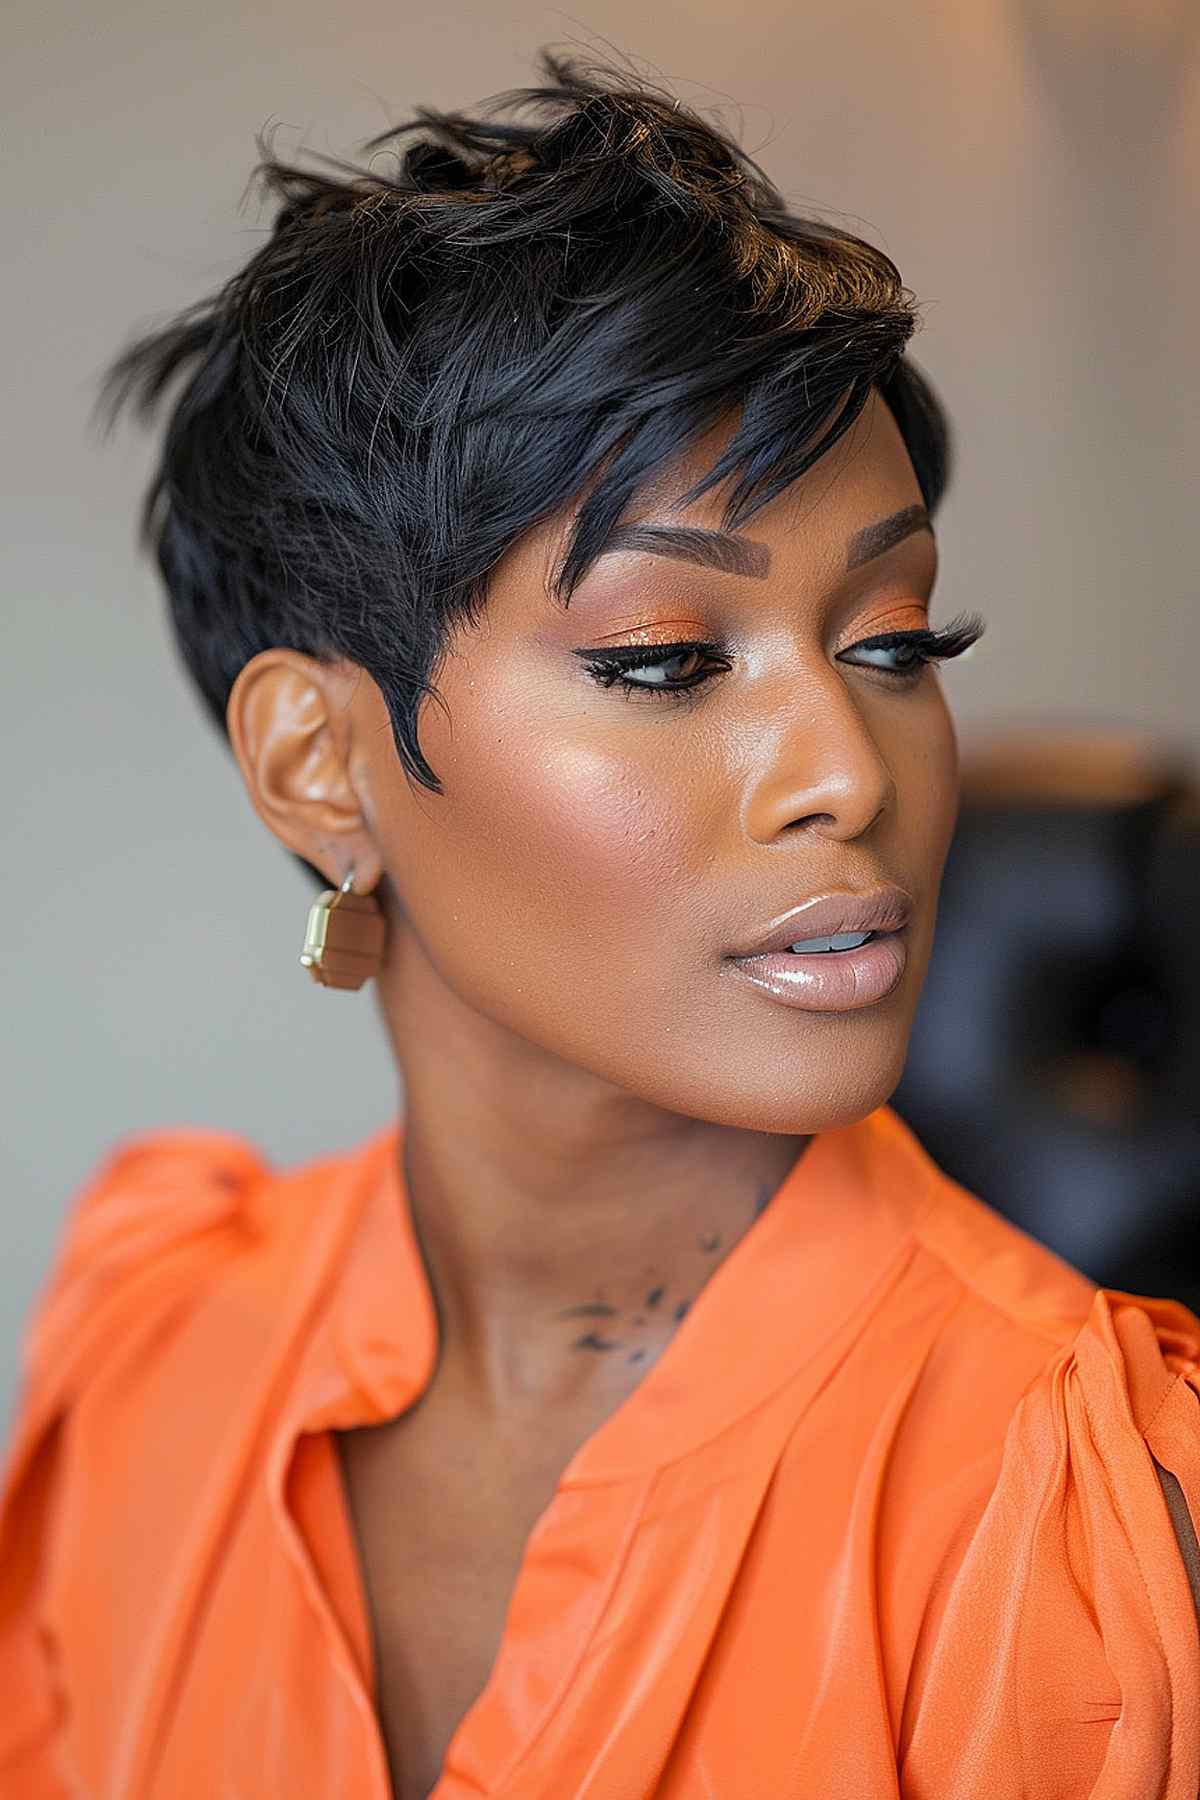 Black woman with a short feathered pixie cut, emphasizing voluminous texture and feathered bangs, suitable for square or round face shapes.